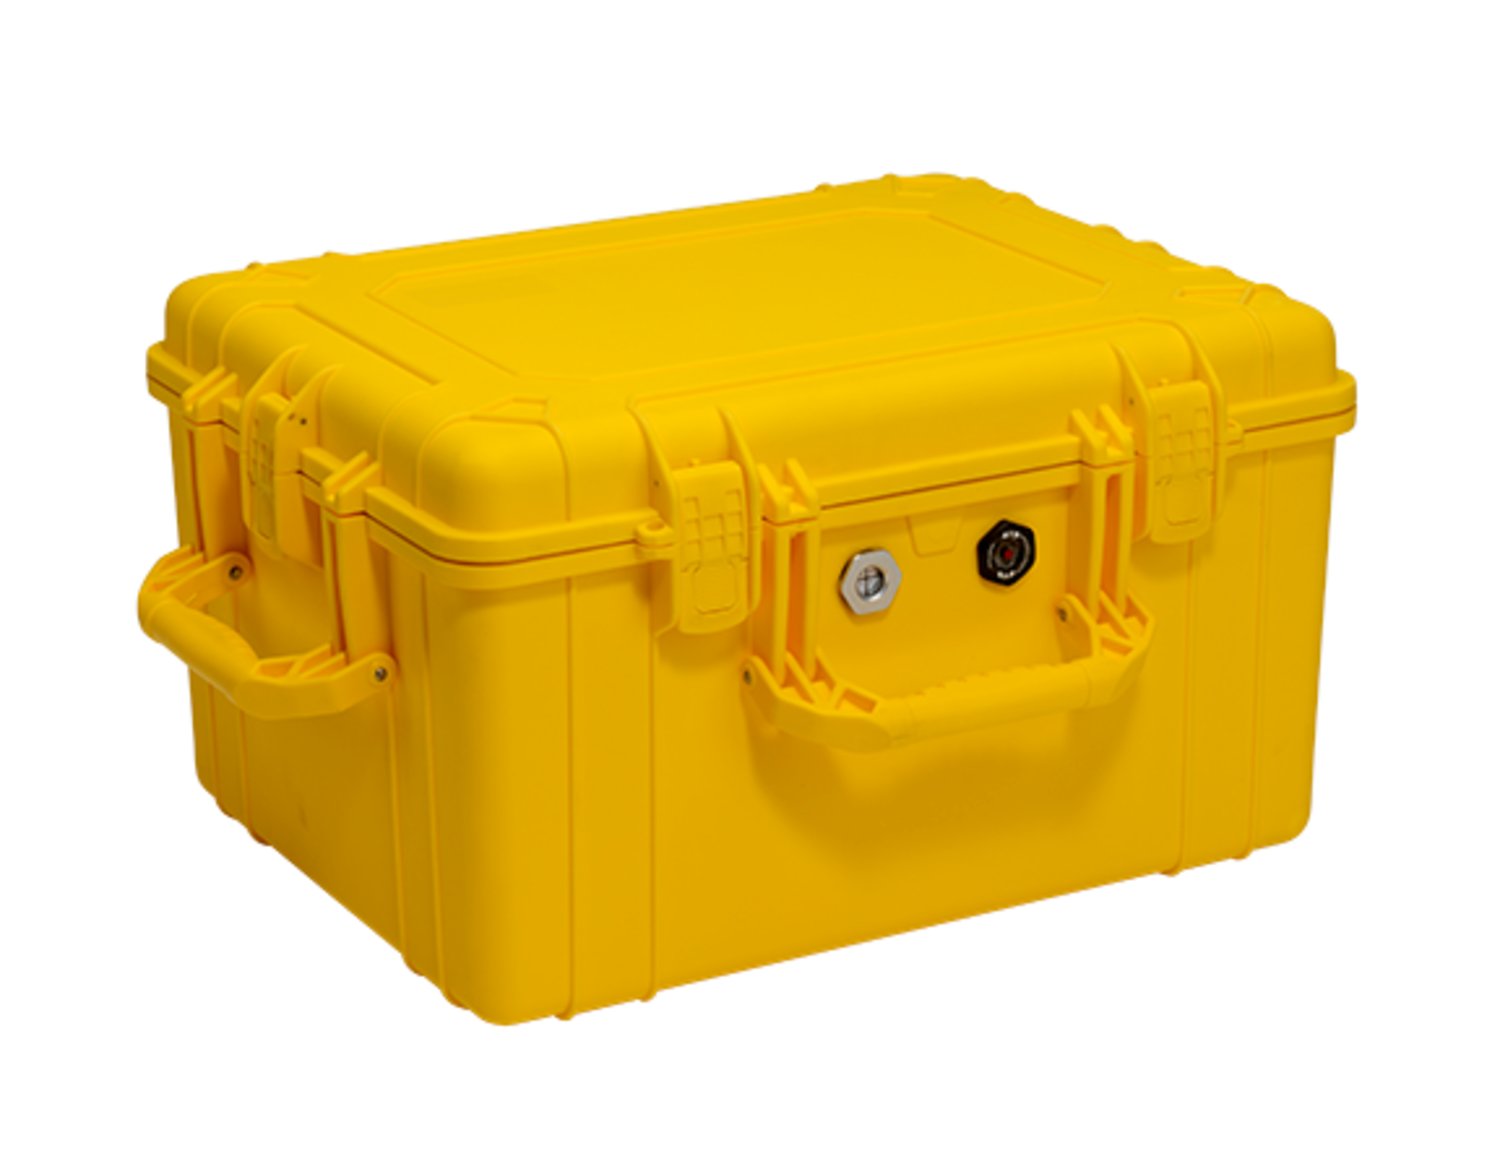 7100246539 - 3M DBI-SALA Rollgliss R550 Rescue and Descent Device Humidity Case 9508289, Up To 500 ft